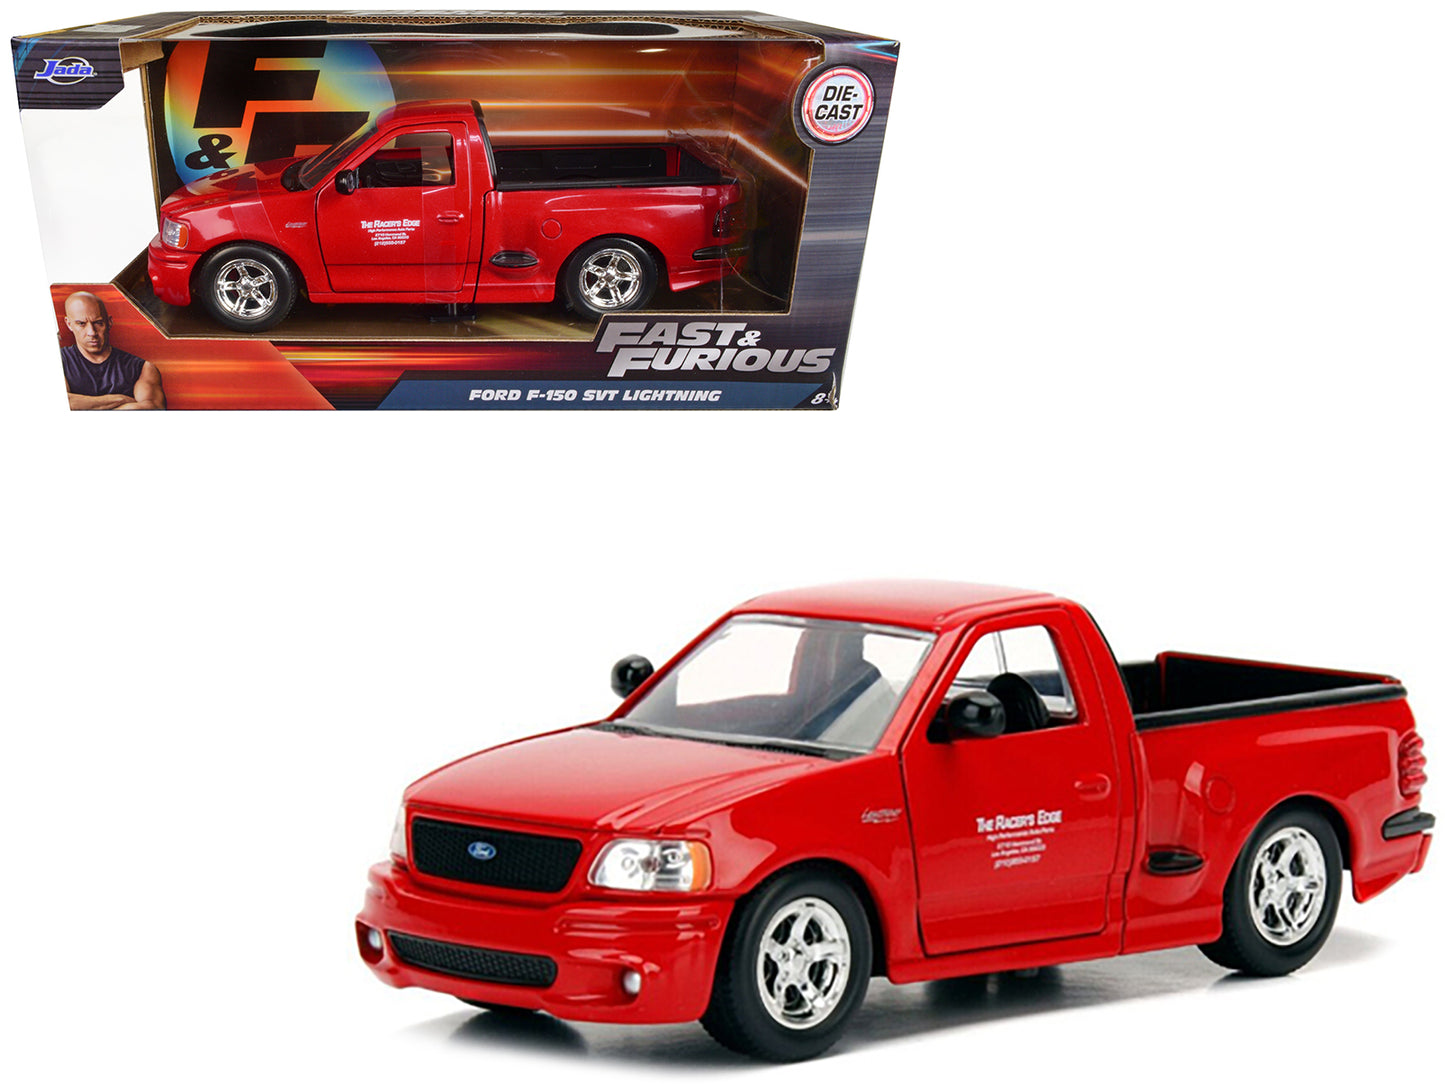 Brand new 1/24 scale diecast car model of Brian's Ford F-150 SVT Lightning Pickup Truck Red Fast Furious Movie die cast model car by Jada.
